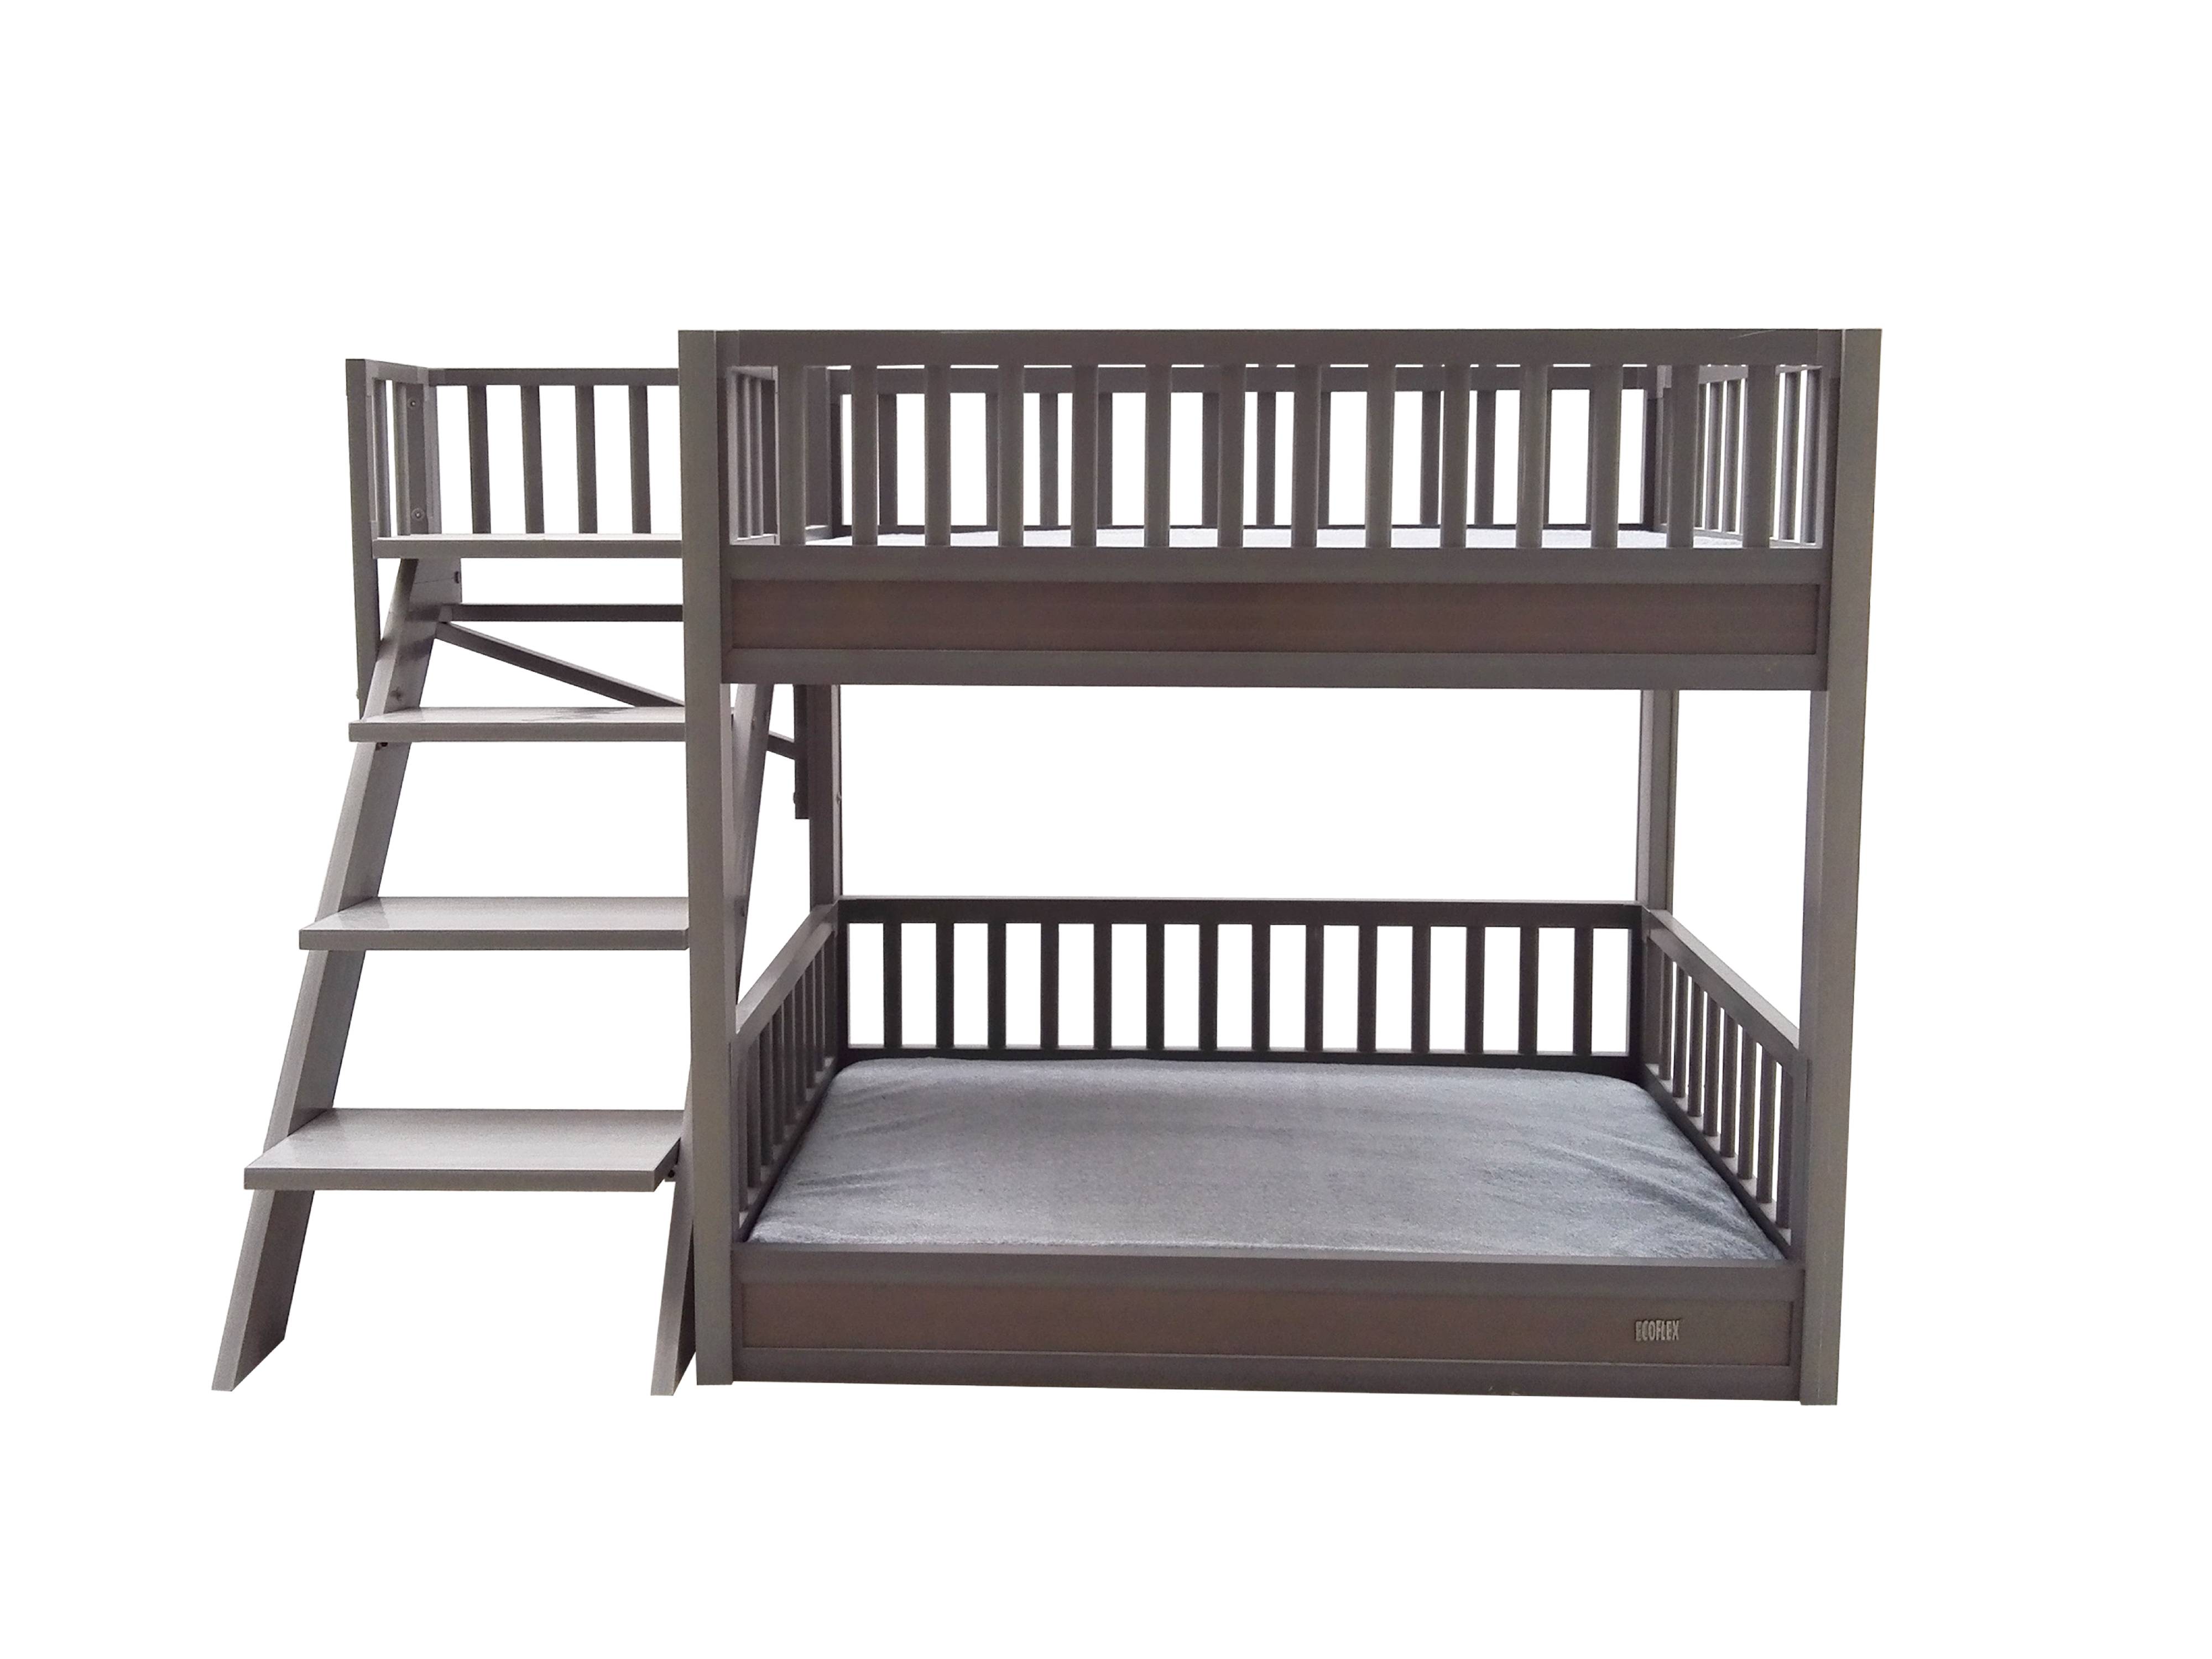 Ecoflex Dog Bunk Bed with Removable Cushions, Gray - image 3 of 10